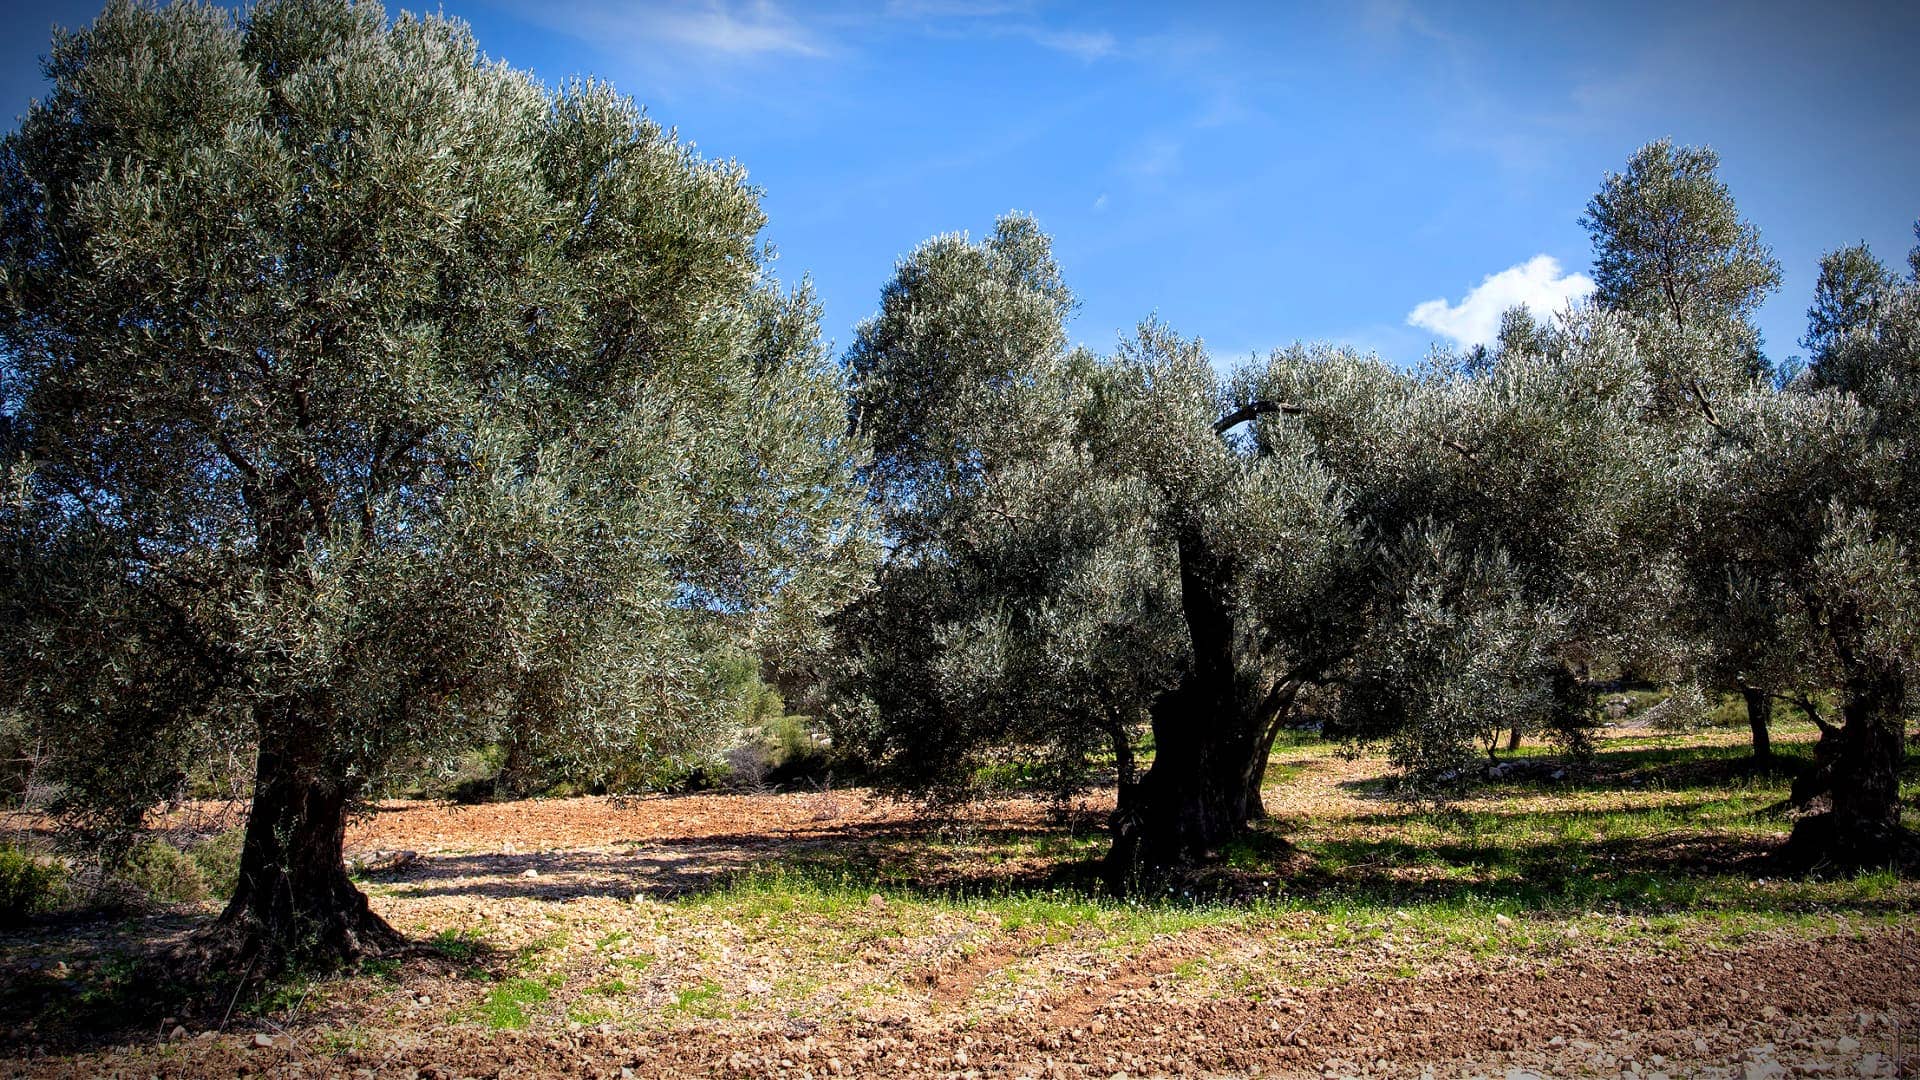 africa-middle-east-business-in-turkey-study-recommends-investments-in-olive-farms-instead-of-coal-mines-olive-oil-times